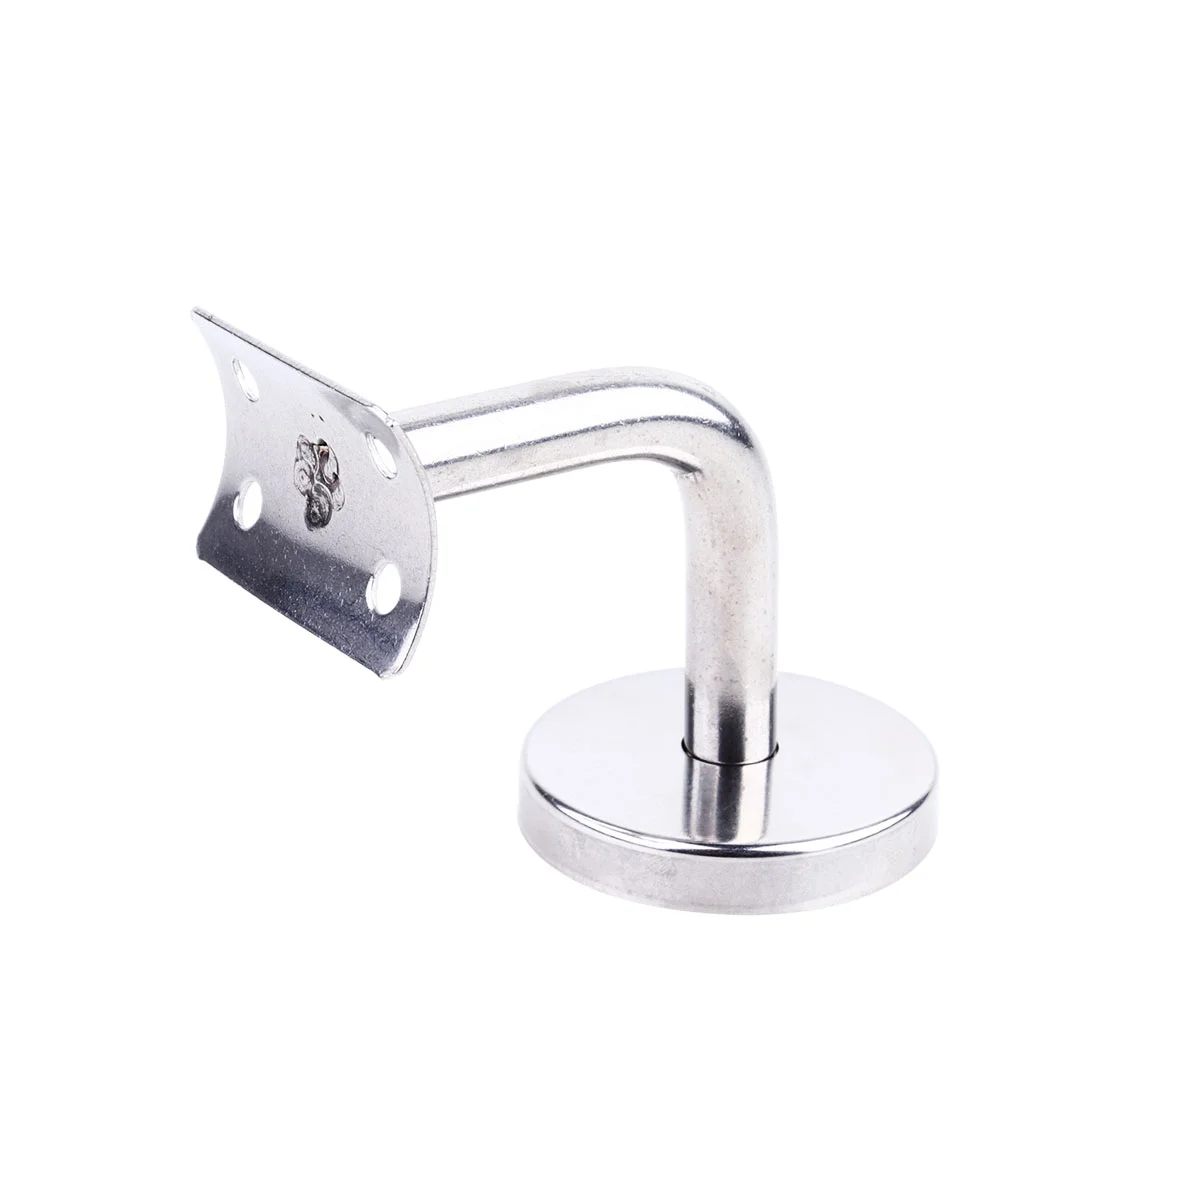 

5Pcs Stainless Steel Wall Holder Handrail Wall Mounted Brackets Supports (without Screw)